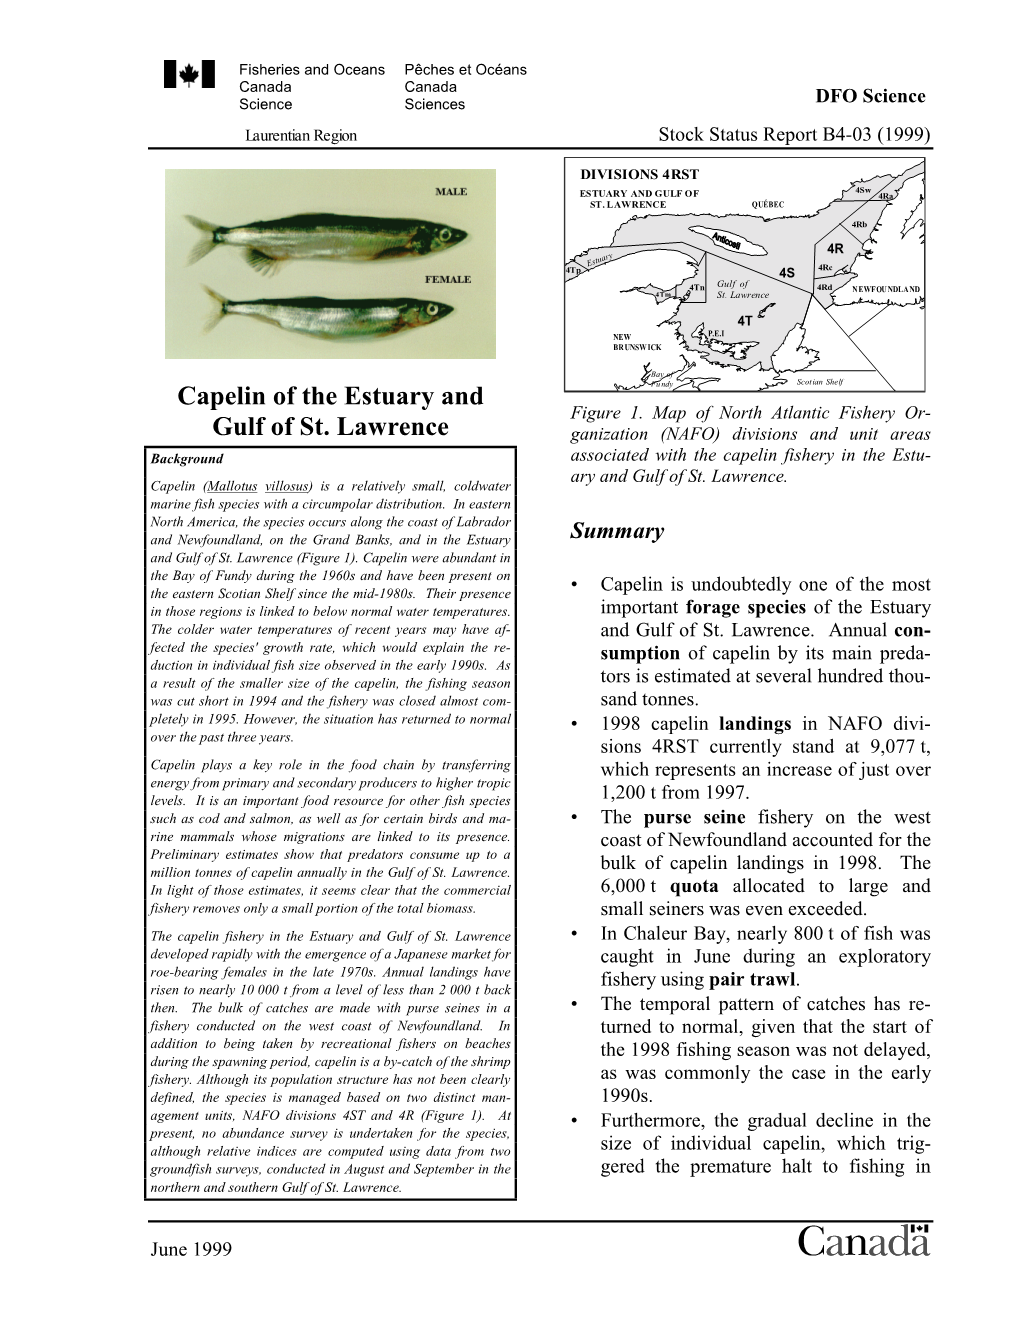 Capelin of the Estuary and the Gulf of St. Lawrence